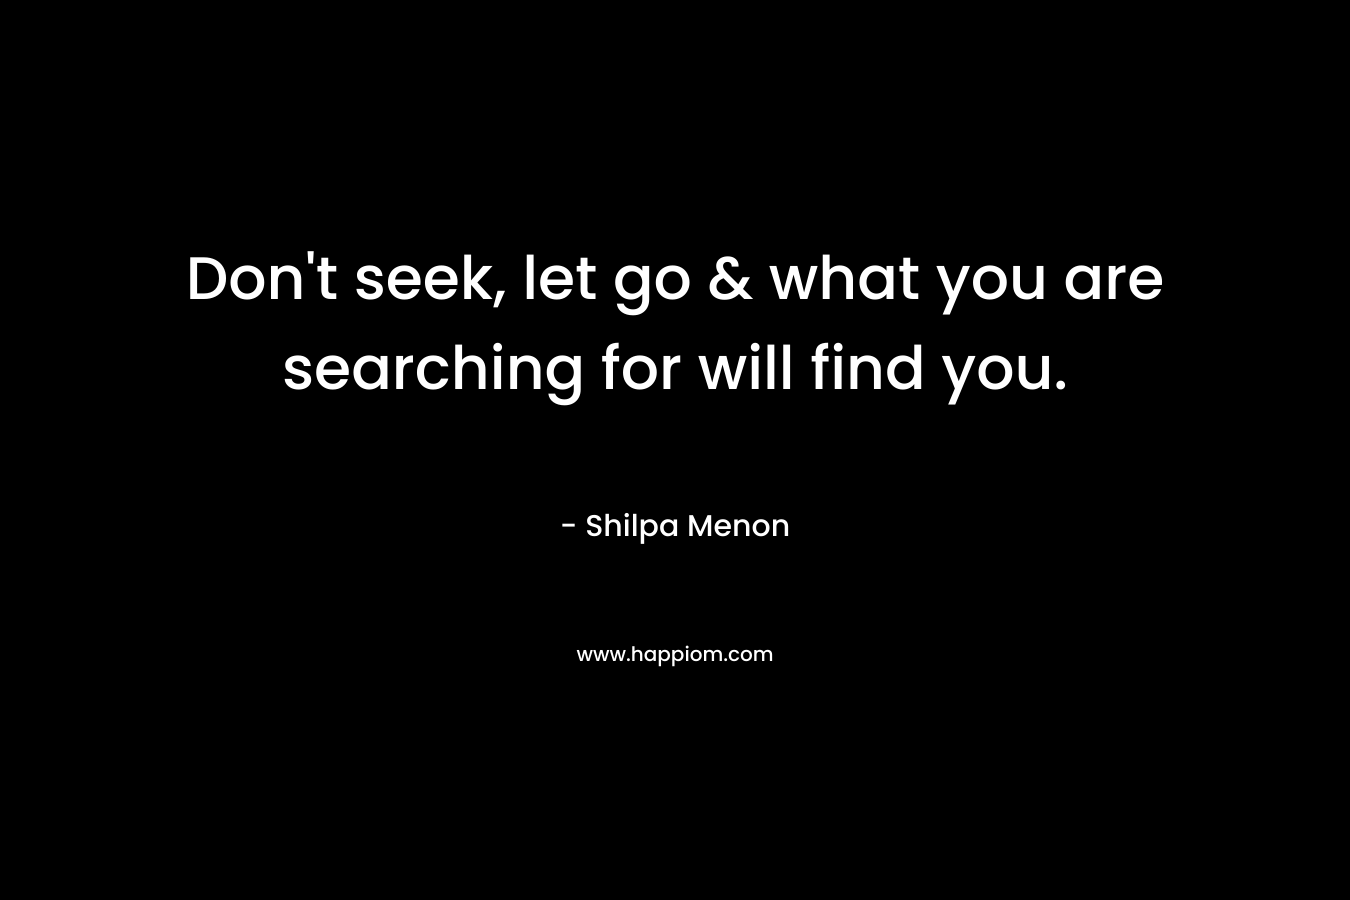 Don't seek, let go & what you are searching for will find you.